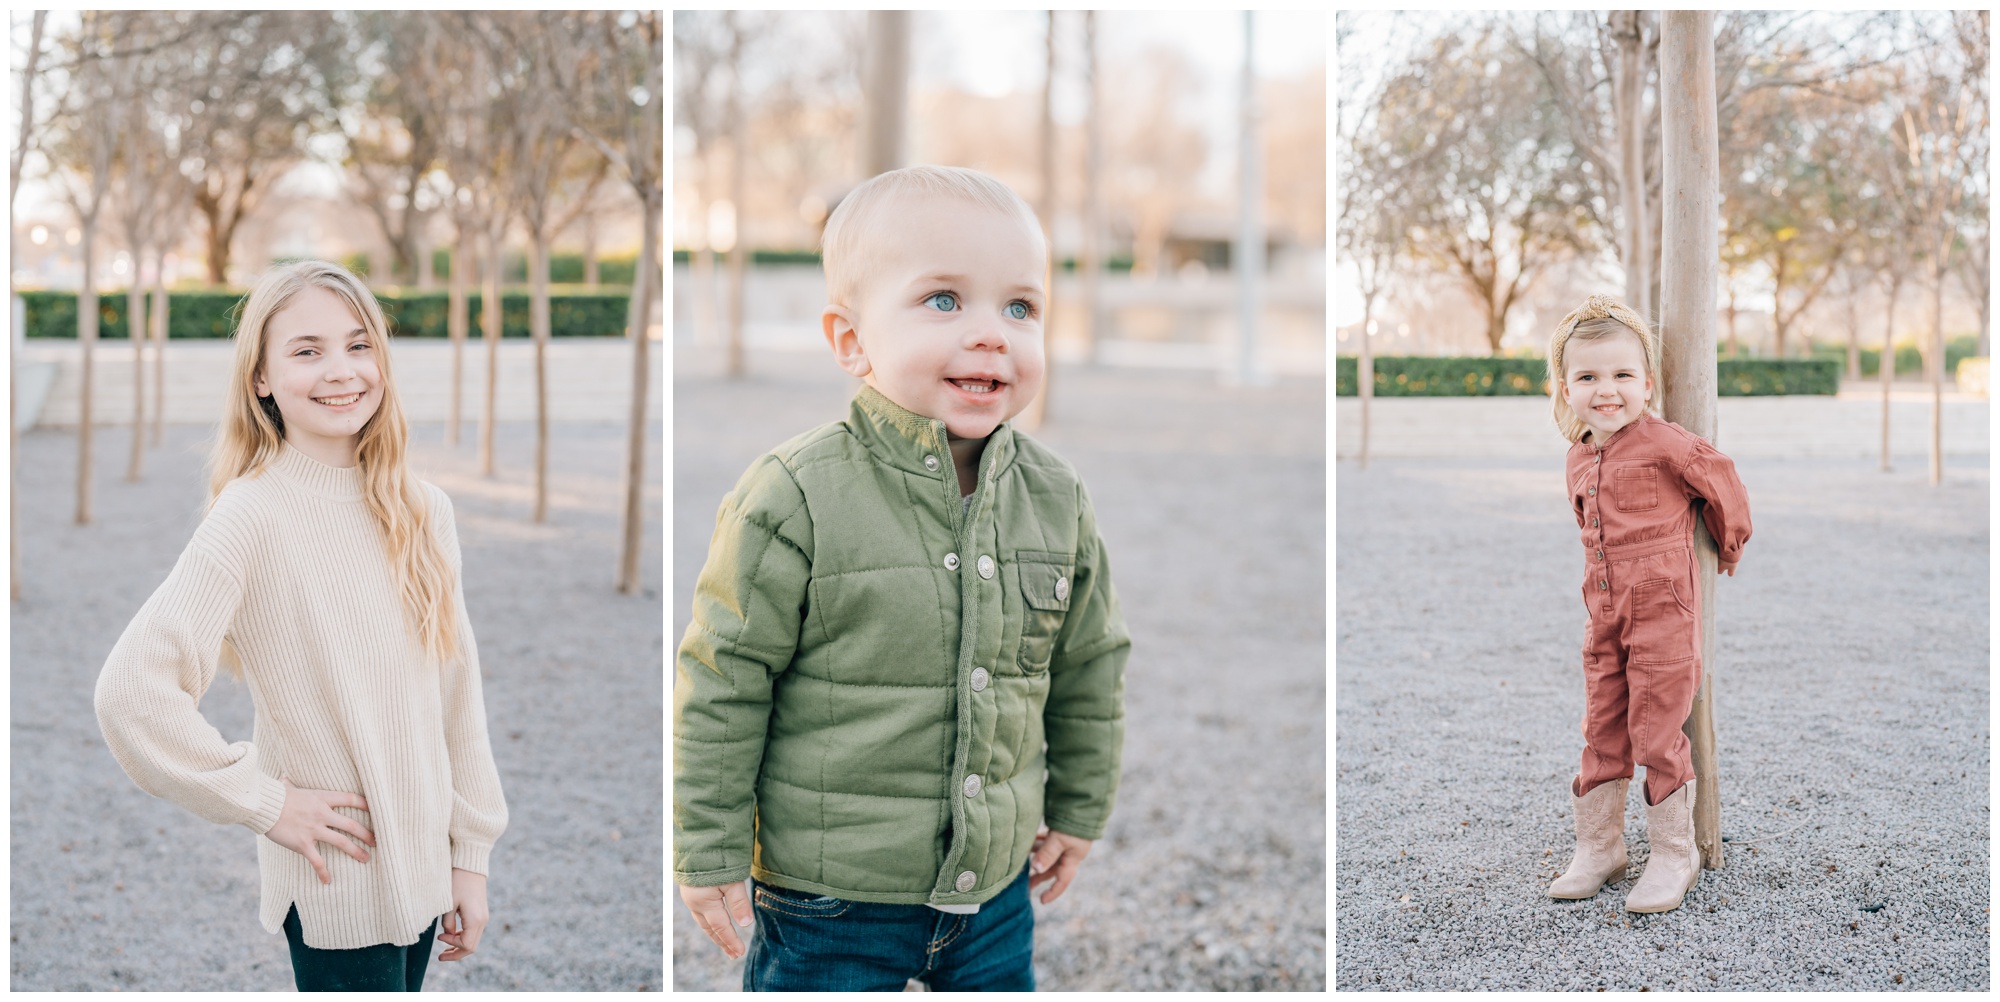 Kimbell Art Museum Family Session | Fort Worth Family Photographer | Lauren Grimes Photography